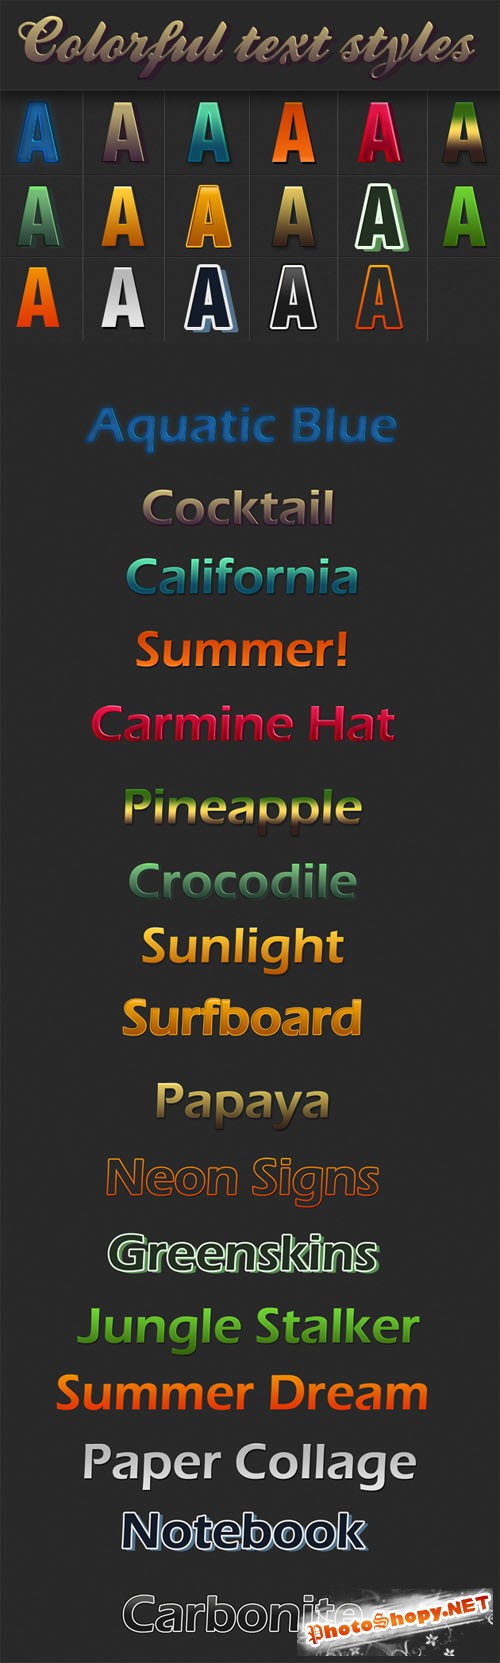 Designtnt - Colorful Text Styles for Photoshop